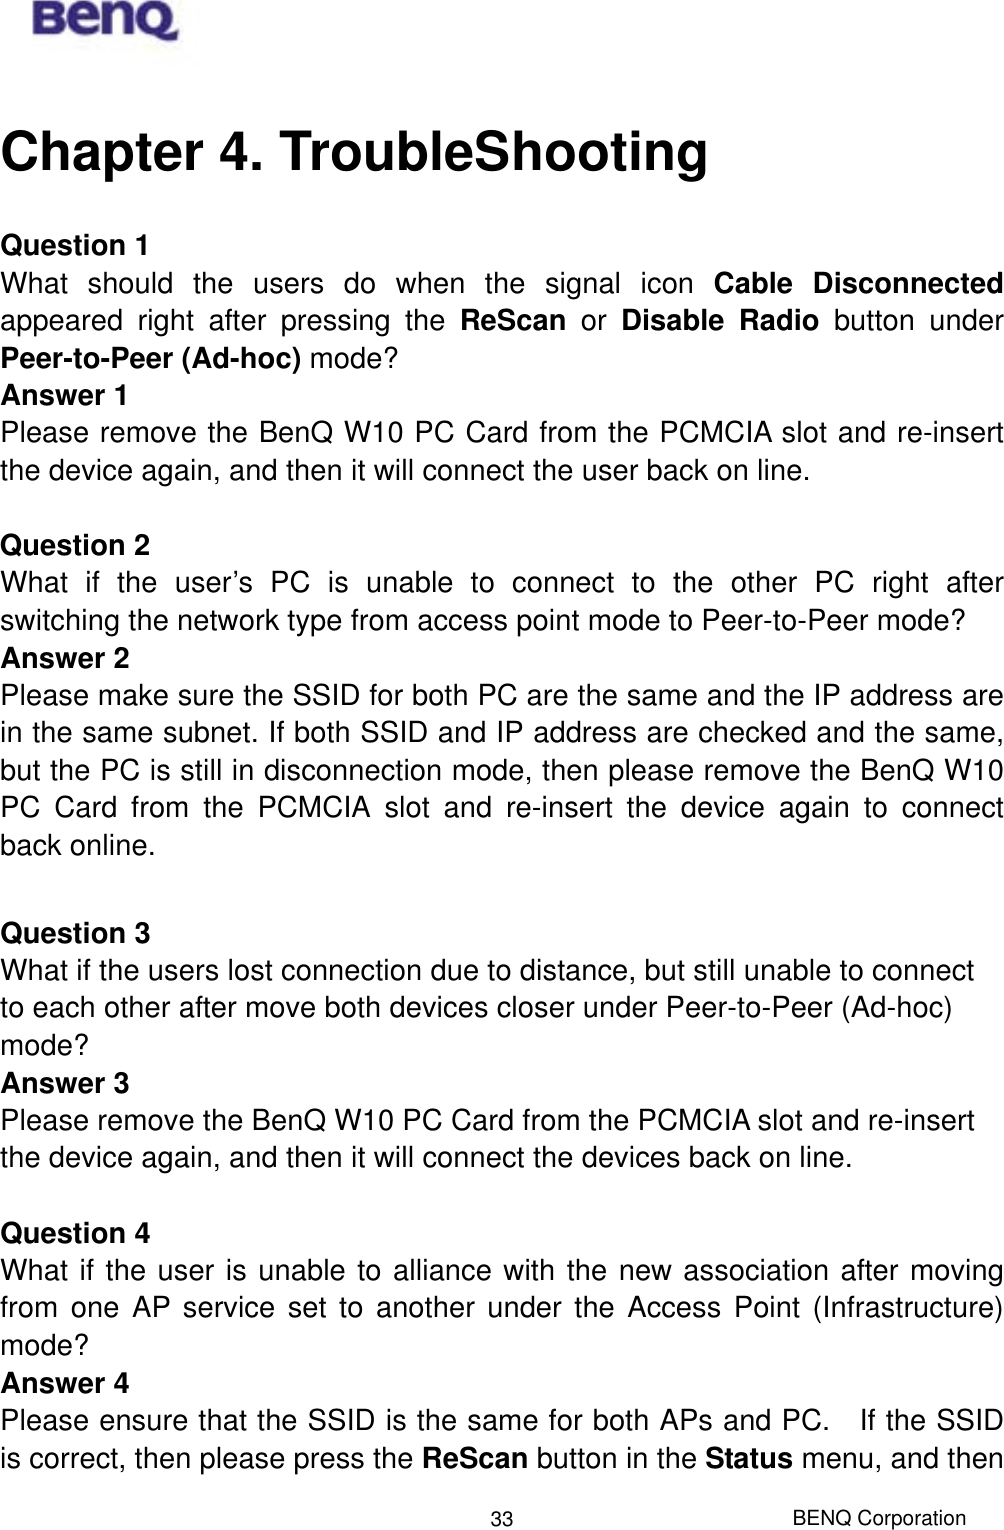  Chapter 4. TroubleShooting Question 1 What should the users do when the signal icon Cable Disconnected appeared right after pressing the ReScan or Disable Radio button under Peer-to-Peer (Ad-hoc) mode? Answer 1 Please remove the BenQ W10 PC Card from the PCMCIA slot and re-insert the device again, and then it will connect the user back on line.  Question 2 What if the user’s PC is unable to connect to the other PC right after switching the network type from access point mode to Peer-to-Peer mode? Answer 2 Please make sure the SSID for both PC are the same and the IP address are in the same subnet. If both SSID and IP address are checked and the same, but the PC is still in disconnection mode, then please remove the BenQ W10 PC Card from the PCMCIA slot and re-insert the device again to connect back online.  Question 3 What if the users lost connection due to distance, but still unable to connect to each other after move both devices closer under Peer-to-Peer (Ad-hoc) mode? Answer 3 Please remove the BenQ W10 PC Card from the PCMCIA slot and re-insert the device again, and then it will connect the devices back on line.  Question 4 What if the user is unable to alliance with the new association after moving from one AP service set to another under the Access Point (Infrastructure) mode? Answer 4 Please ensure that the SSID is the same for both APs and PC.    If the SSID is correct, then please press the ReScan button in the Status menu, and then BENQ Corporation 33